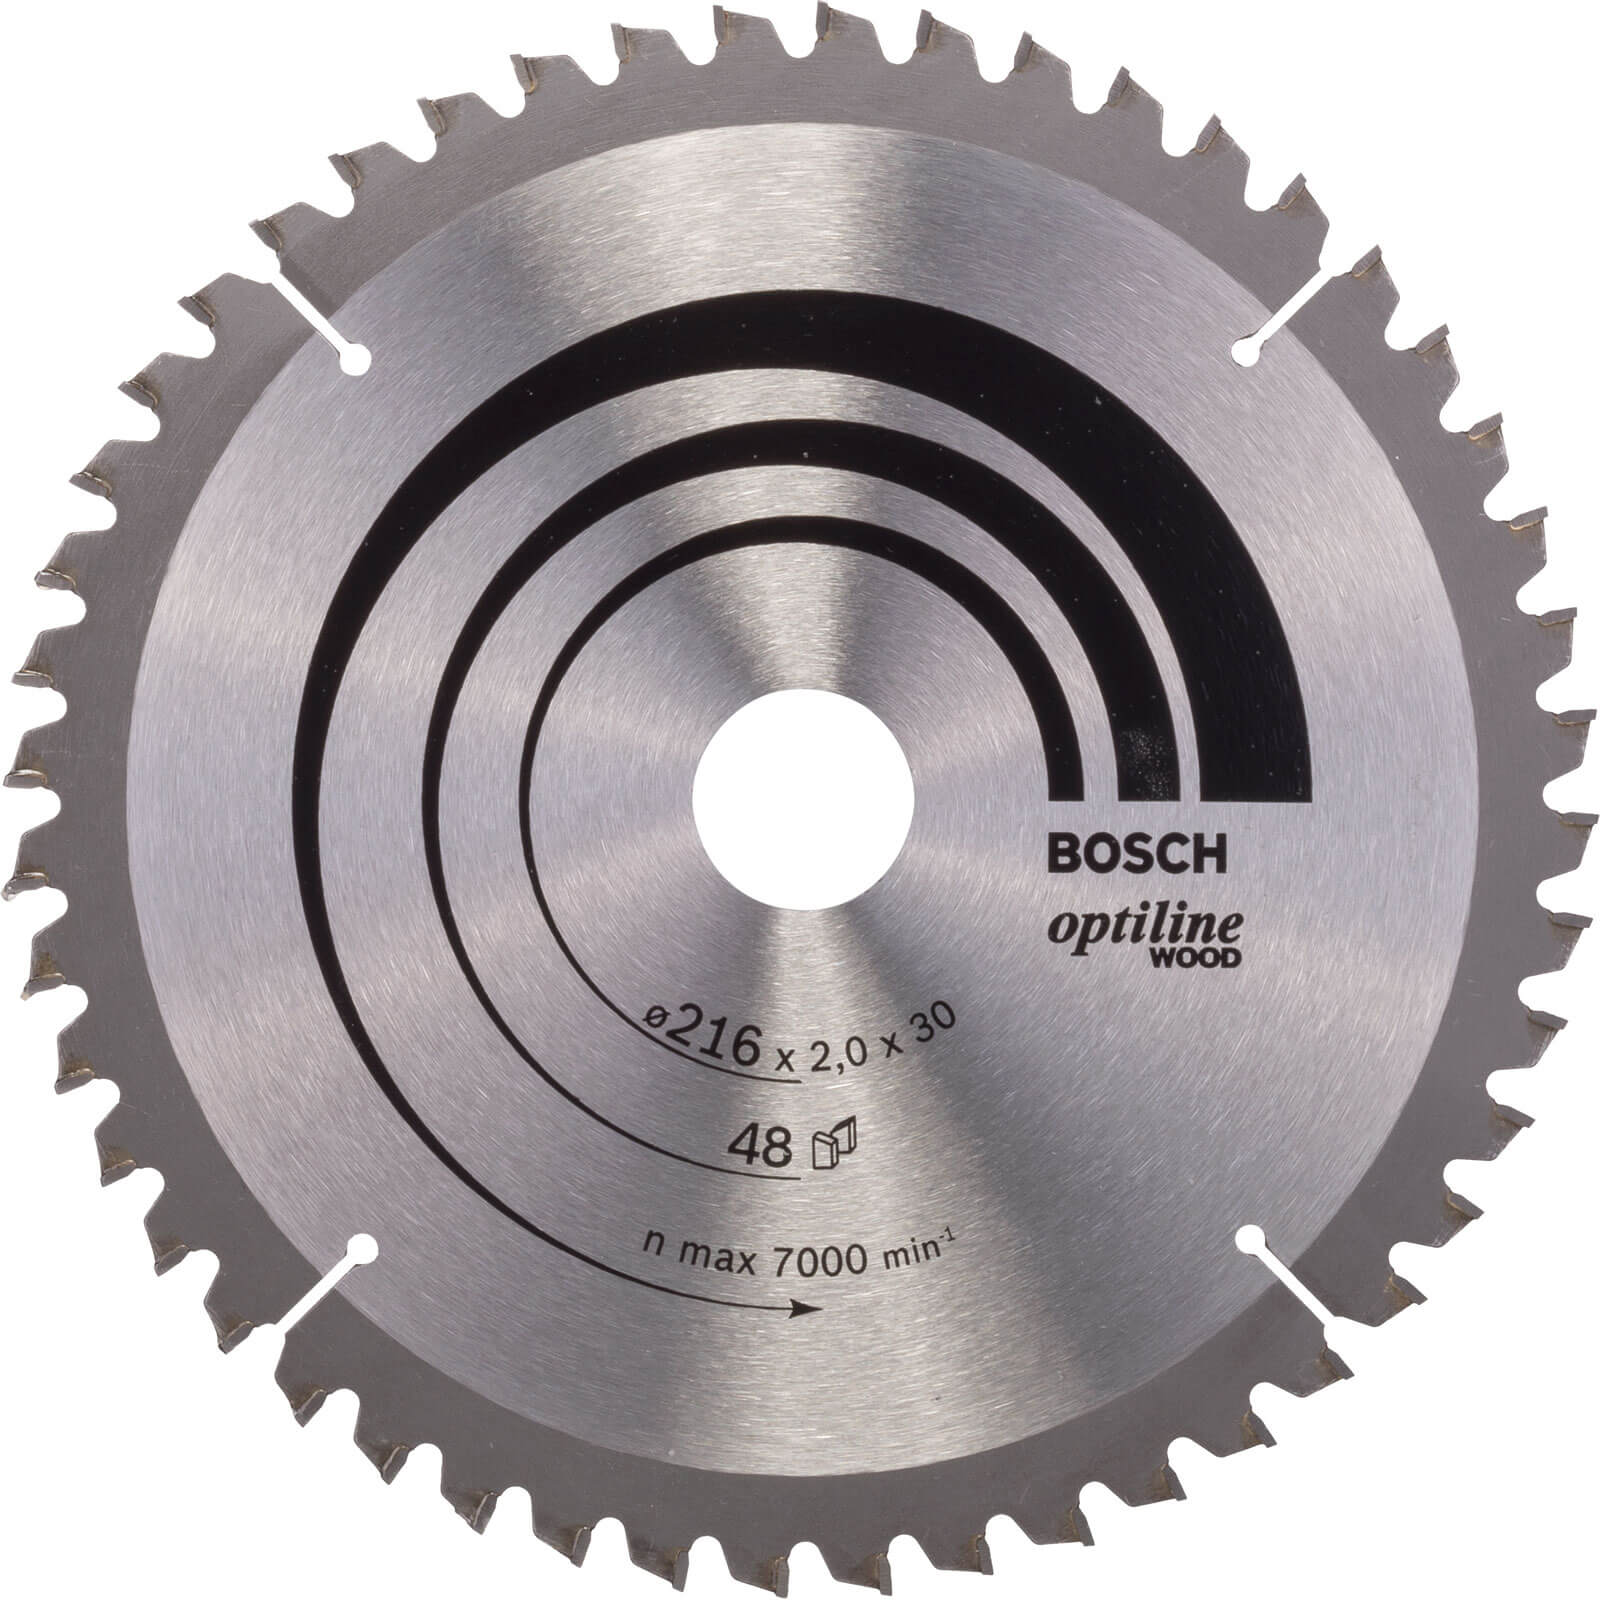 Image of Bosch Optiline Wood Cutting Mitre Saw Blade 216mm 48T 30mm